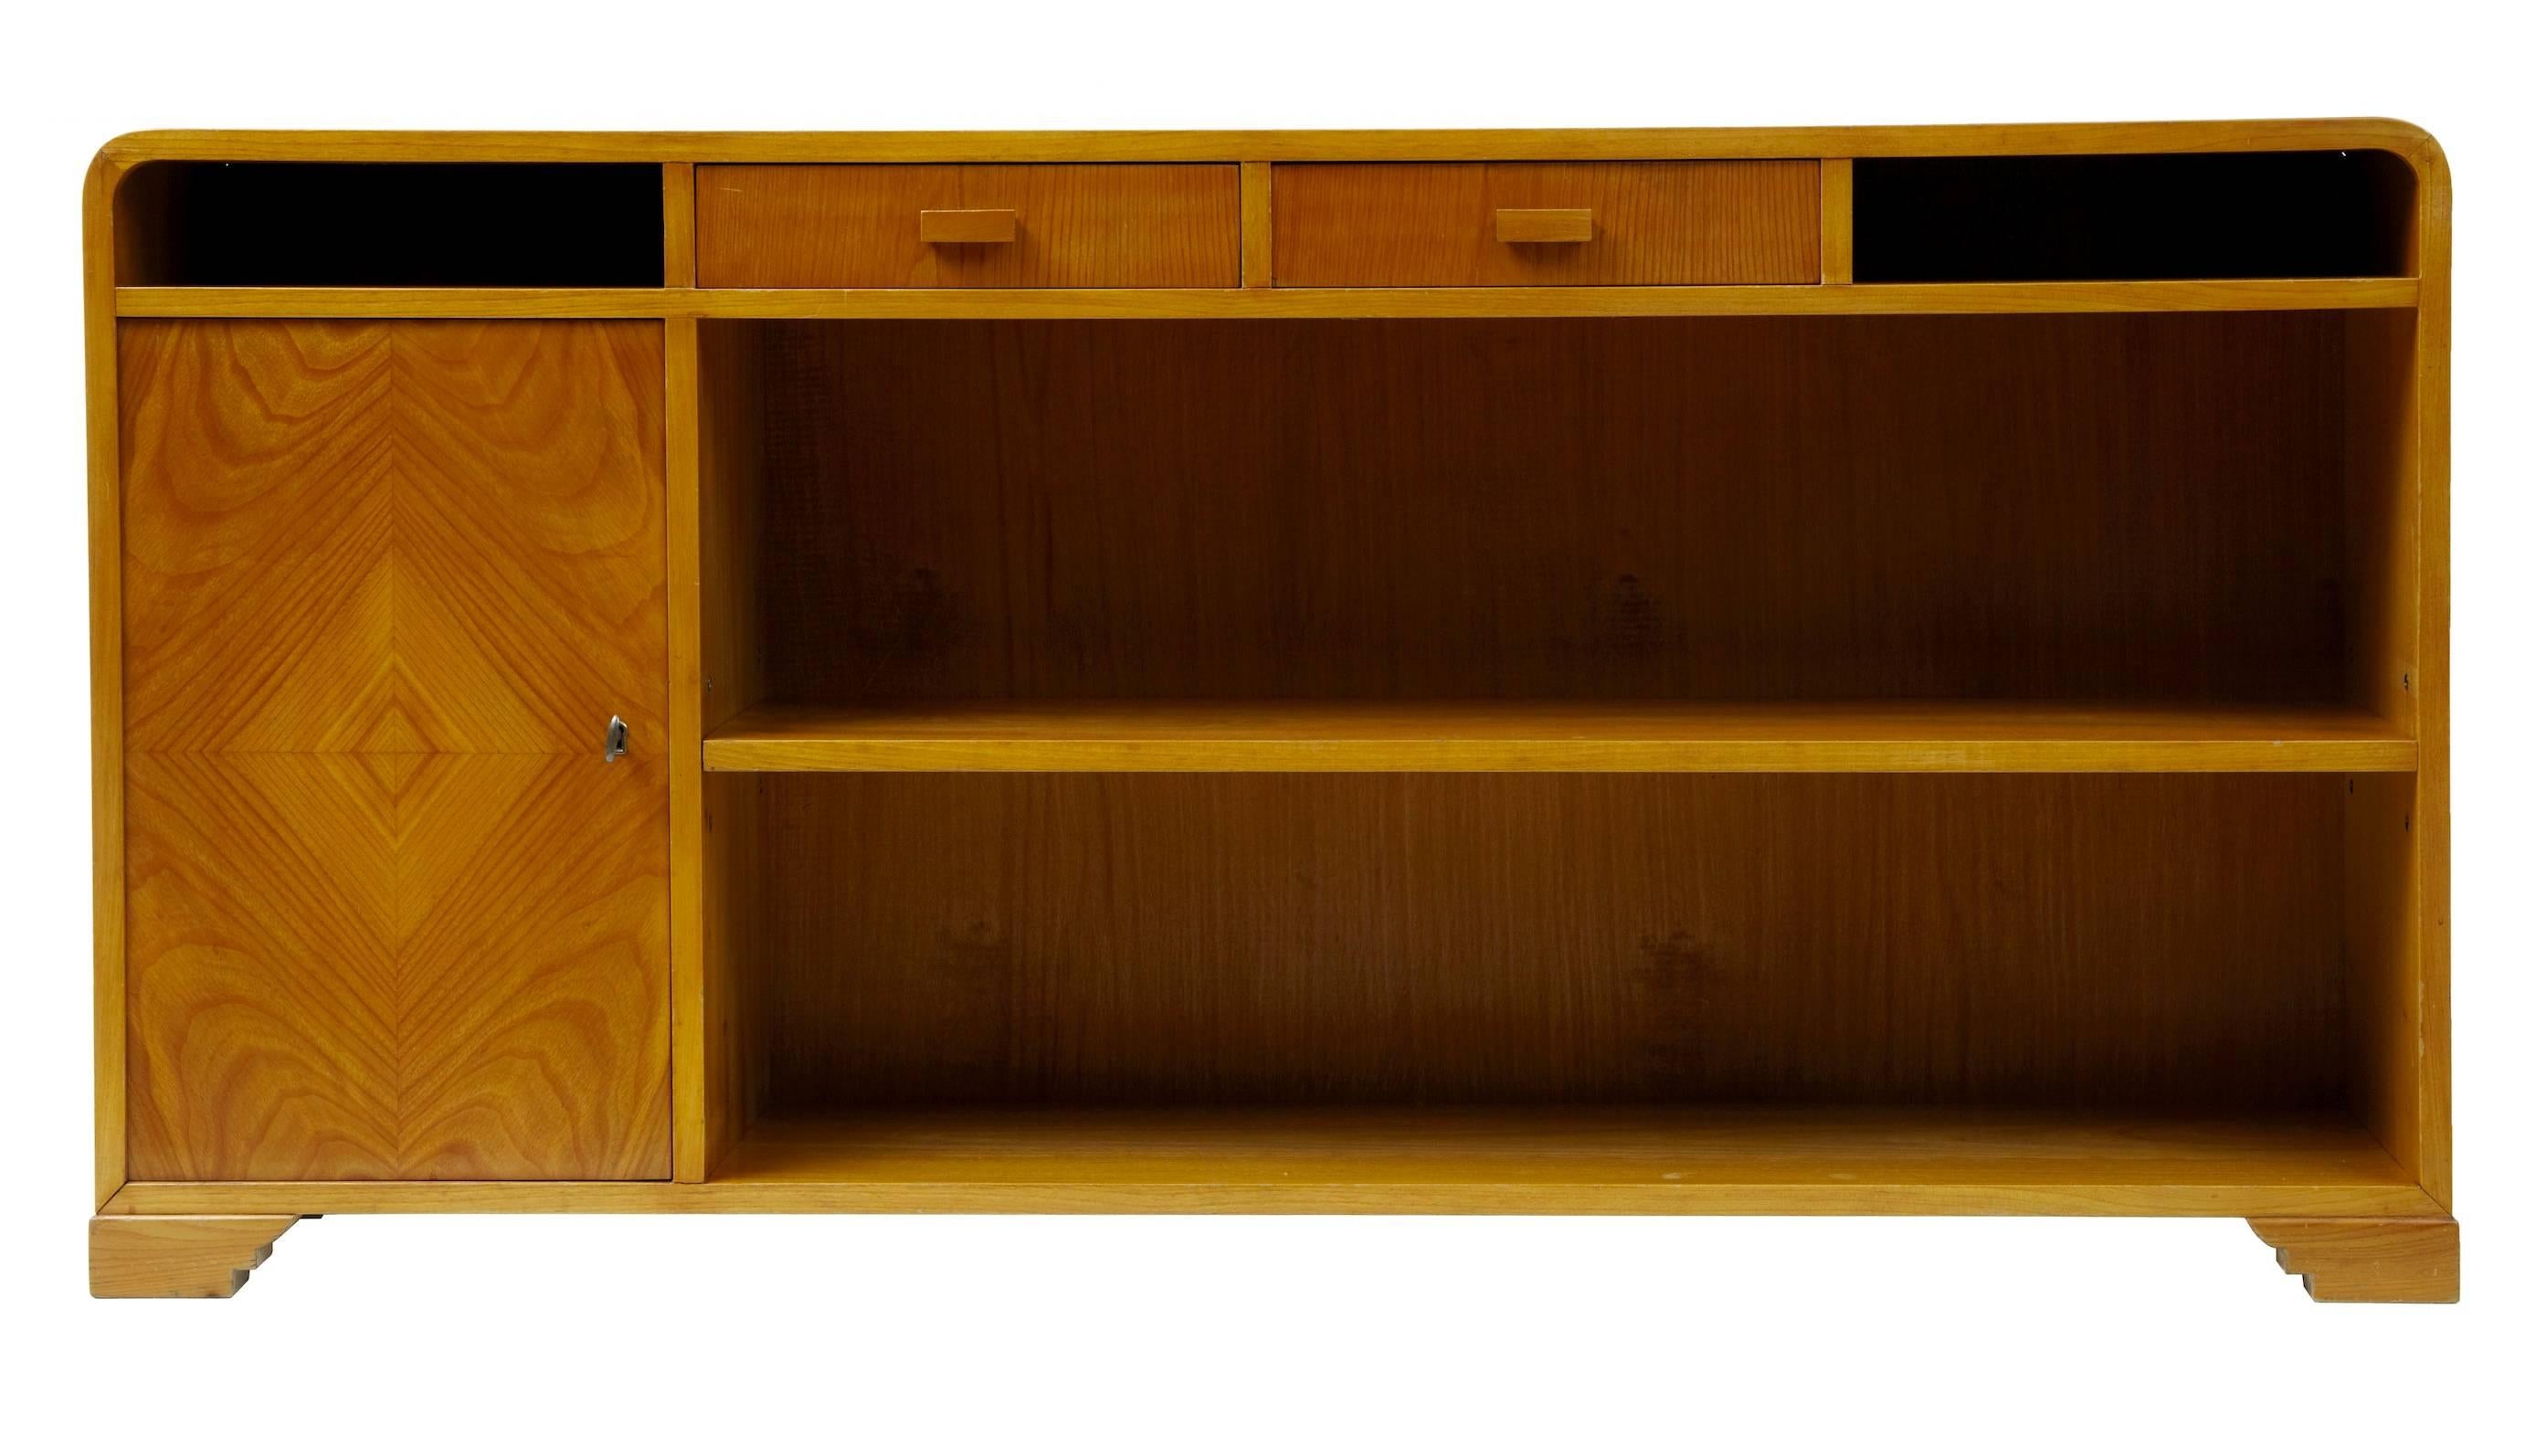 Good quality late art deco elm bookcase circa 1950
Stylish curved form top, below which are 2 open sections and 2 drawers.  Single shelf main bookcase section, which quarter veneered single door cupboard containing a further shelf.
Nice rich